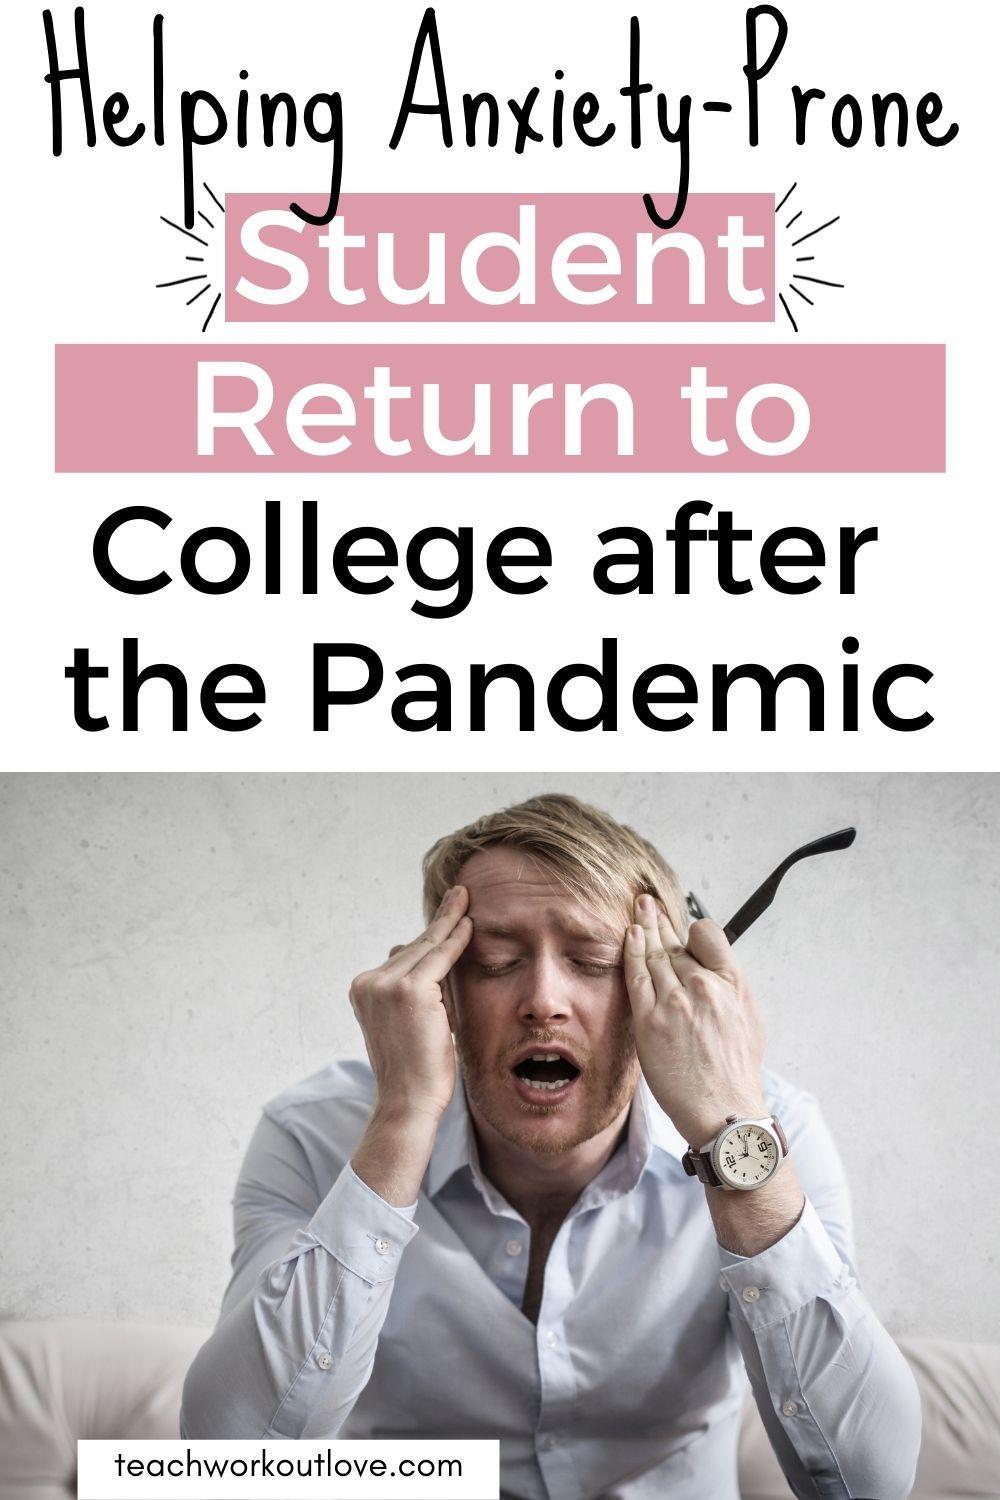 Helping Anxiety-Prone Students Return to College after the Pandemic